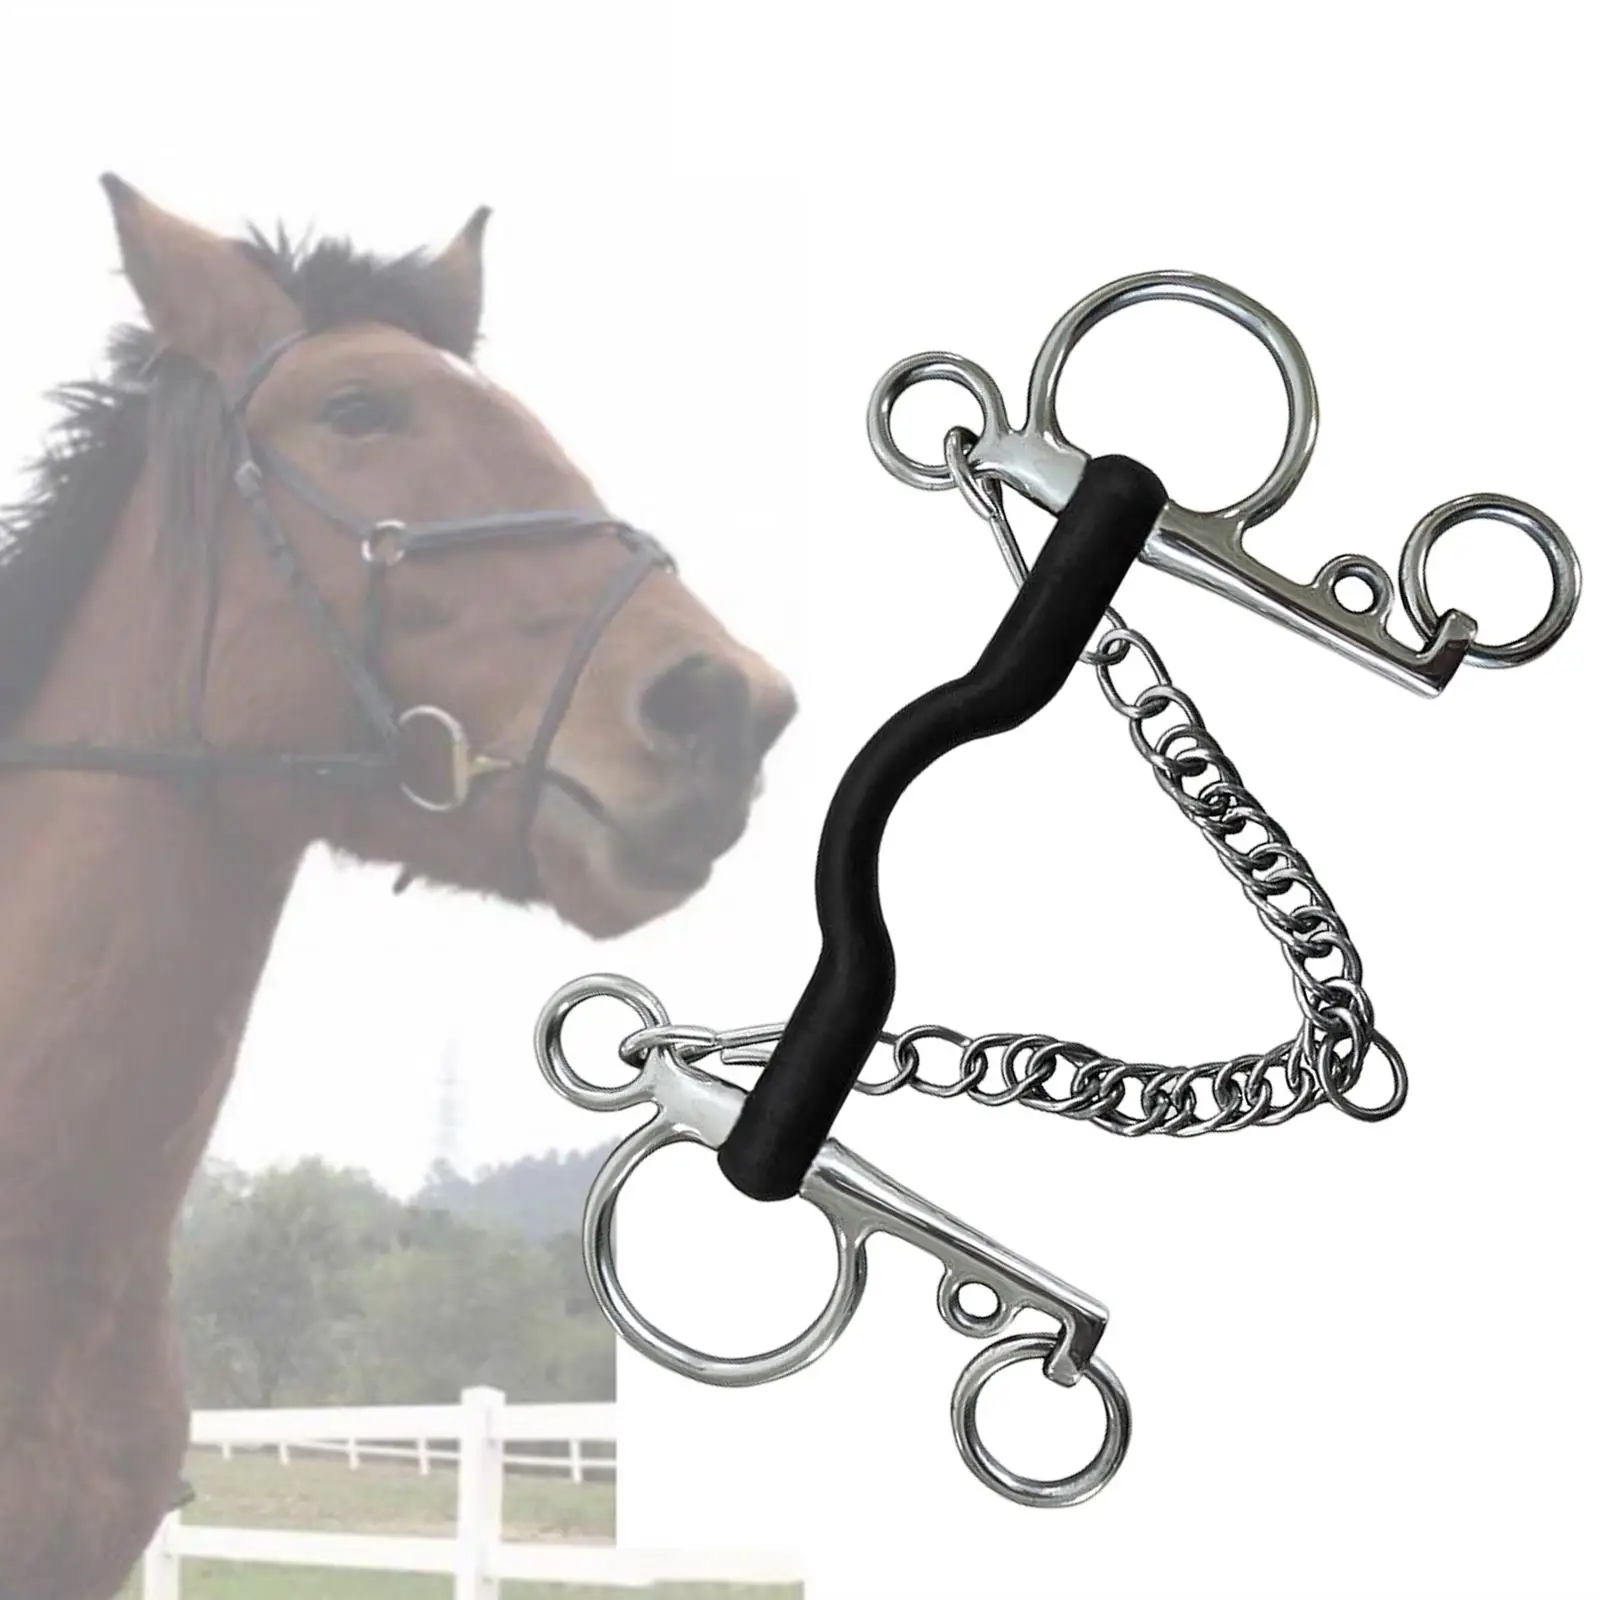 Horse Bit Cheek with Silver Trims Harness for Training Equipment Performance